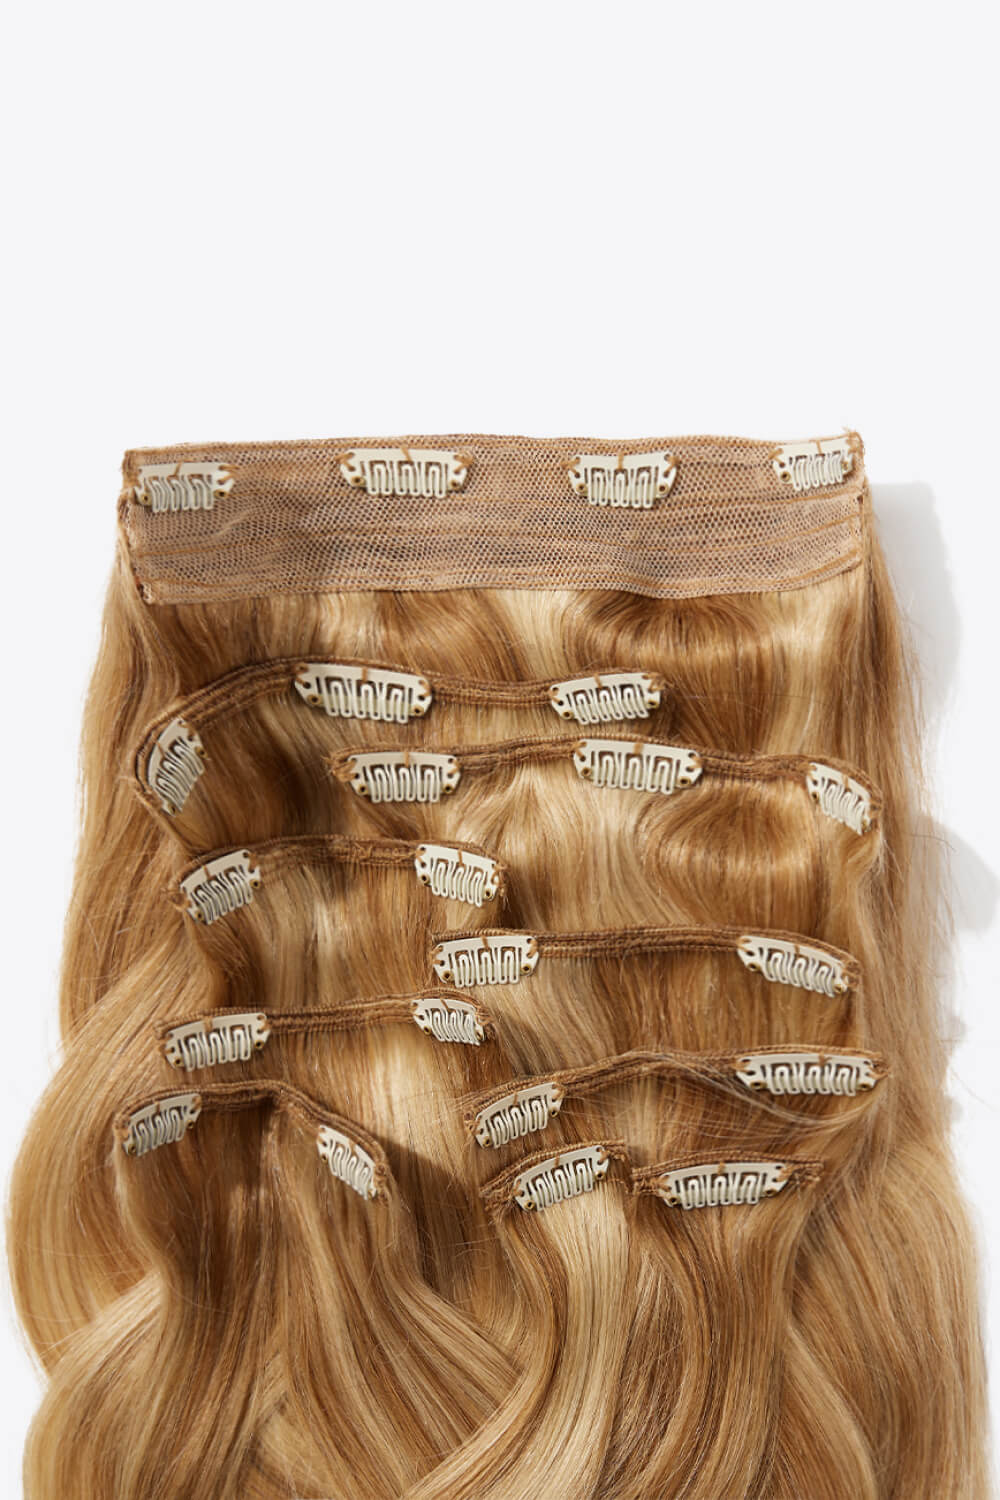 Nr. 10 Natural Straight Clip-in Hair Extensions Human Hair DromedarShop.com Online Boutique